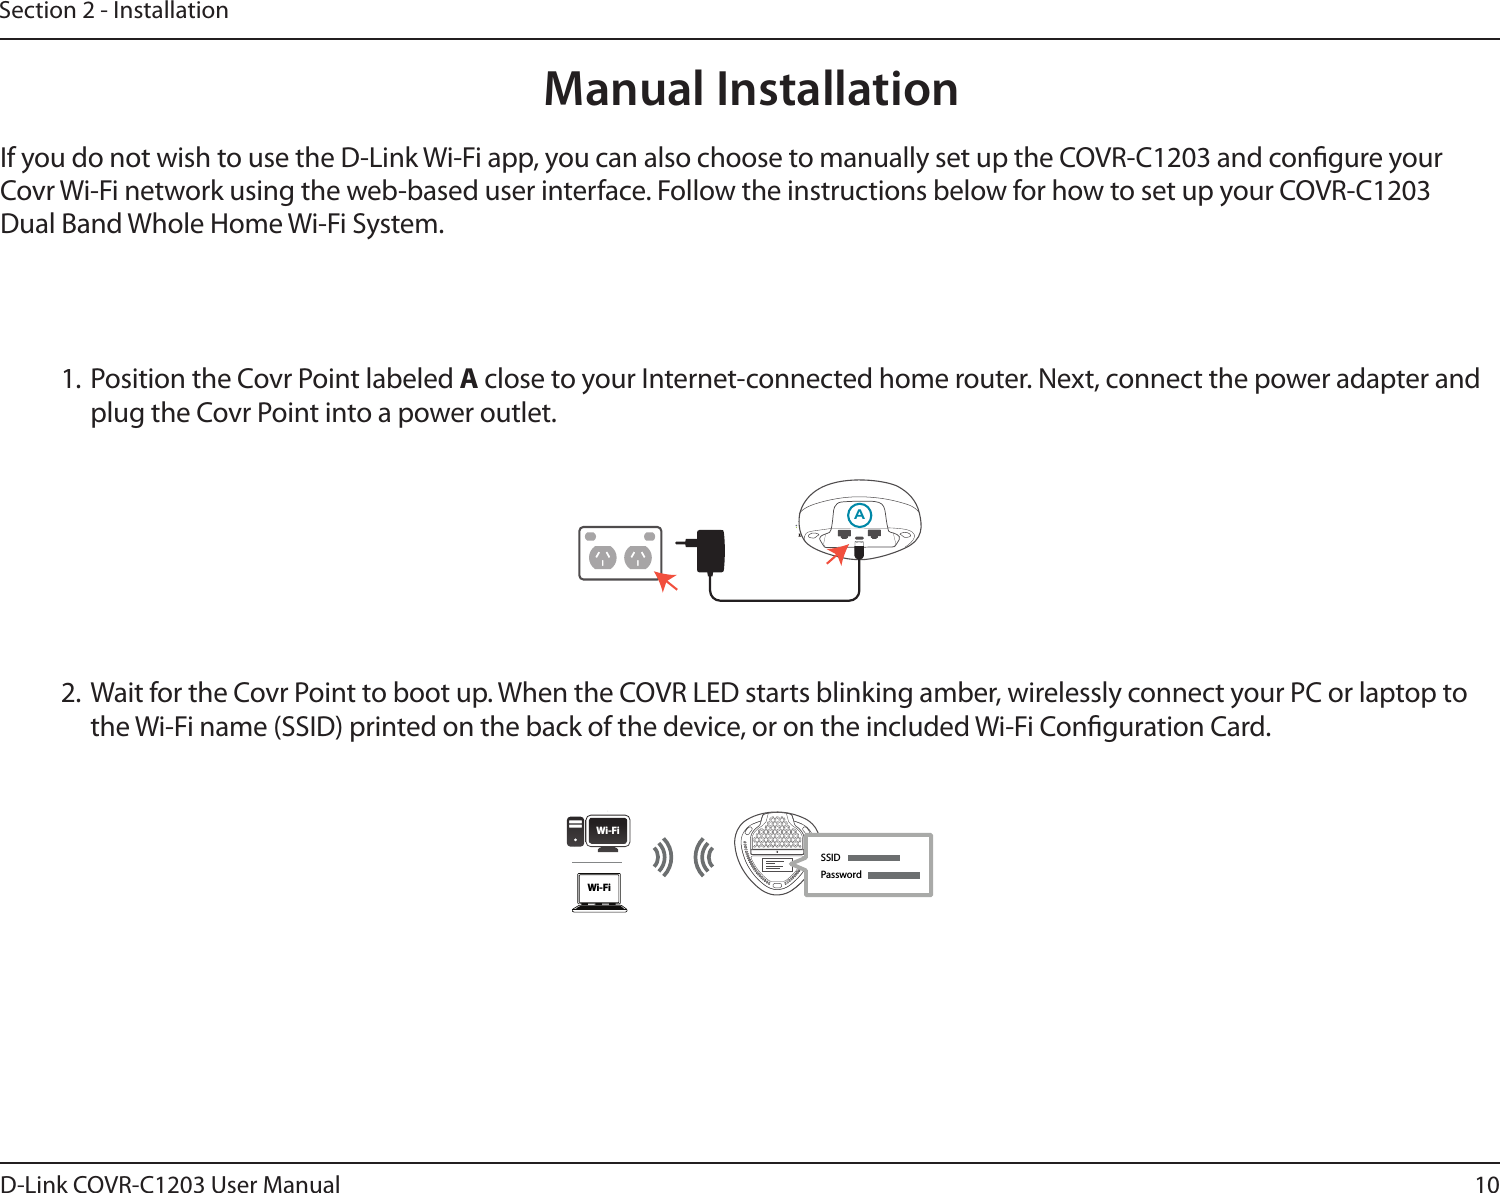 10D-Link COVR-C1203 User ManualSection 2 - Installation2. Wait for the Covr Point to boot up. When the COVR LED starts blinking amber, wirelessly connect your PC or laptop to the Wi-Fi name (SSID) printed on the back of the device, or on the included Wi-Fi Conguration Card.1. Position the Covr Point labeled A close to your Internet-connected home router. Next, connect the power adapter and plug the Covr Point into a power outlet.GManual Installation If you do not wish to use the D-Link Wi-Fi app, you can also choose to manually set up the COVR-C1203 and congure your Covr Wi-Fi network using the web-based user interface. Follow the instructions below for how to set up your COVR-C1203 Dual Band Whole Home Wi-Fi System.ASSIDWi-FiWi-FiPassword